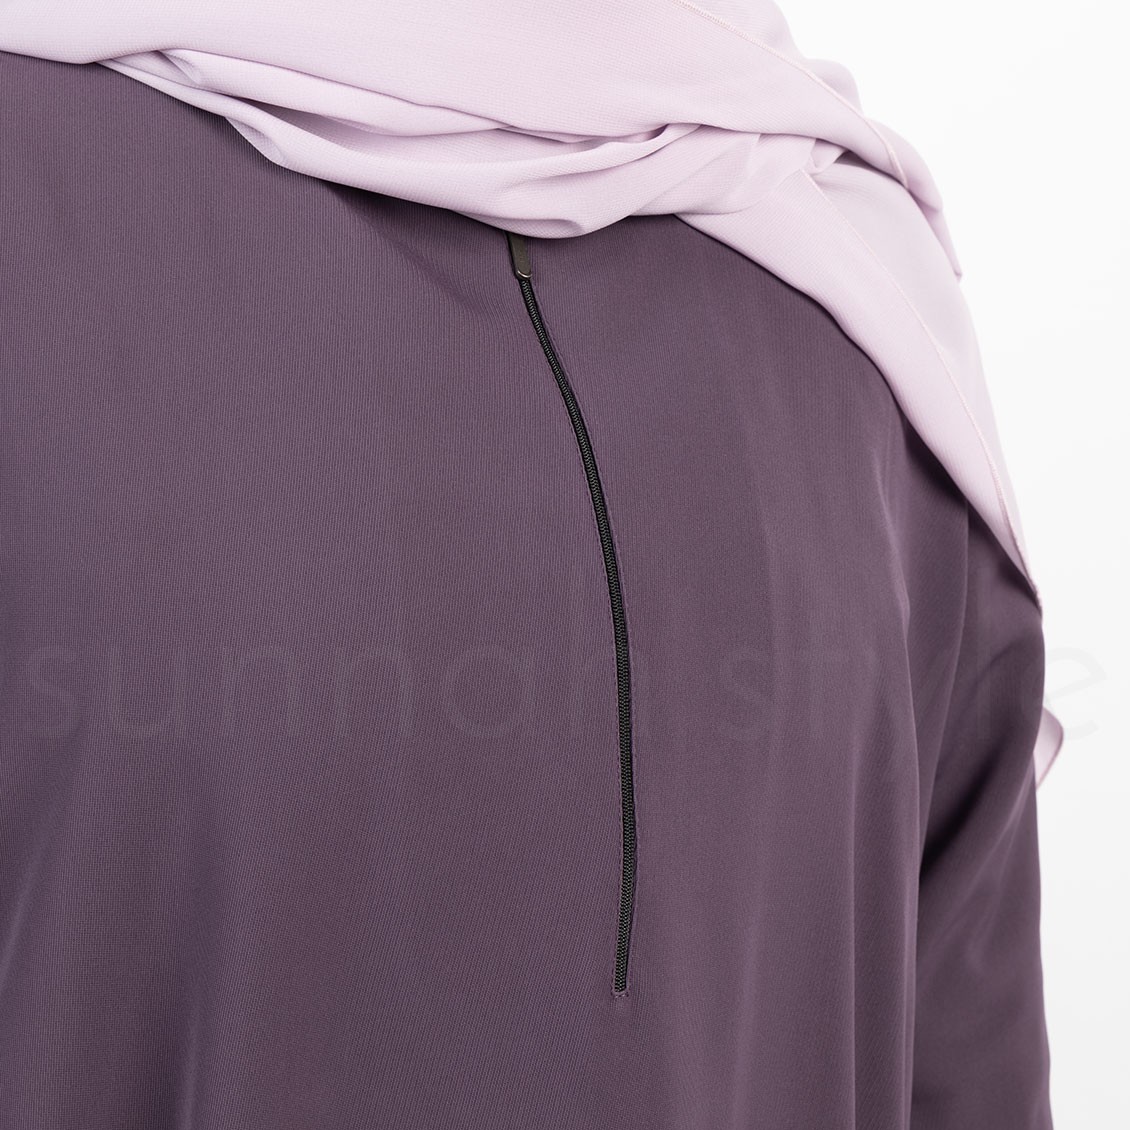 Sunnah Style Essentials Closed Abaya Plus Size Pockets Lilac